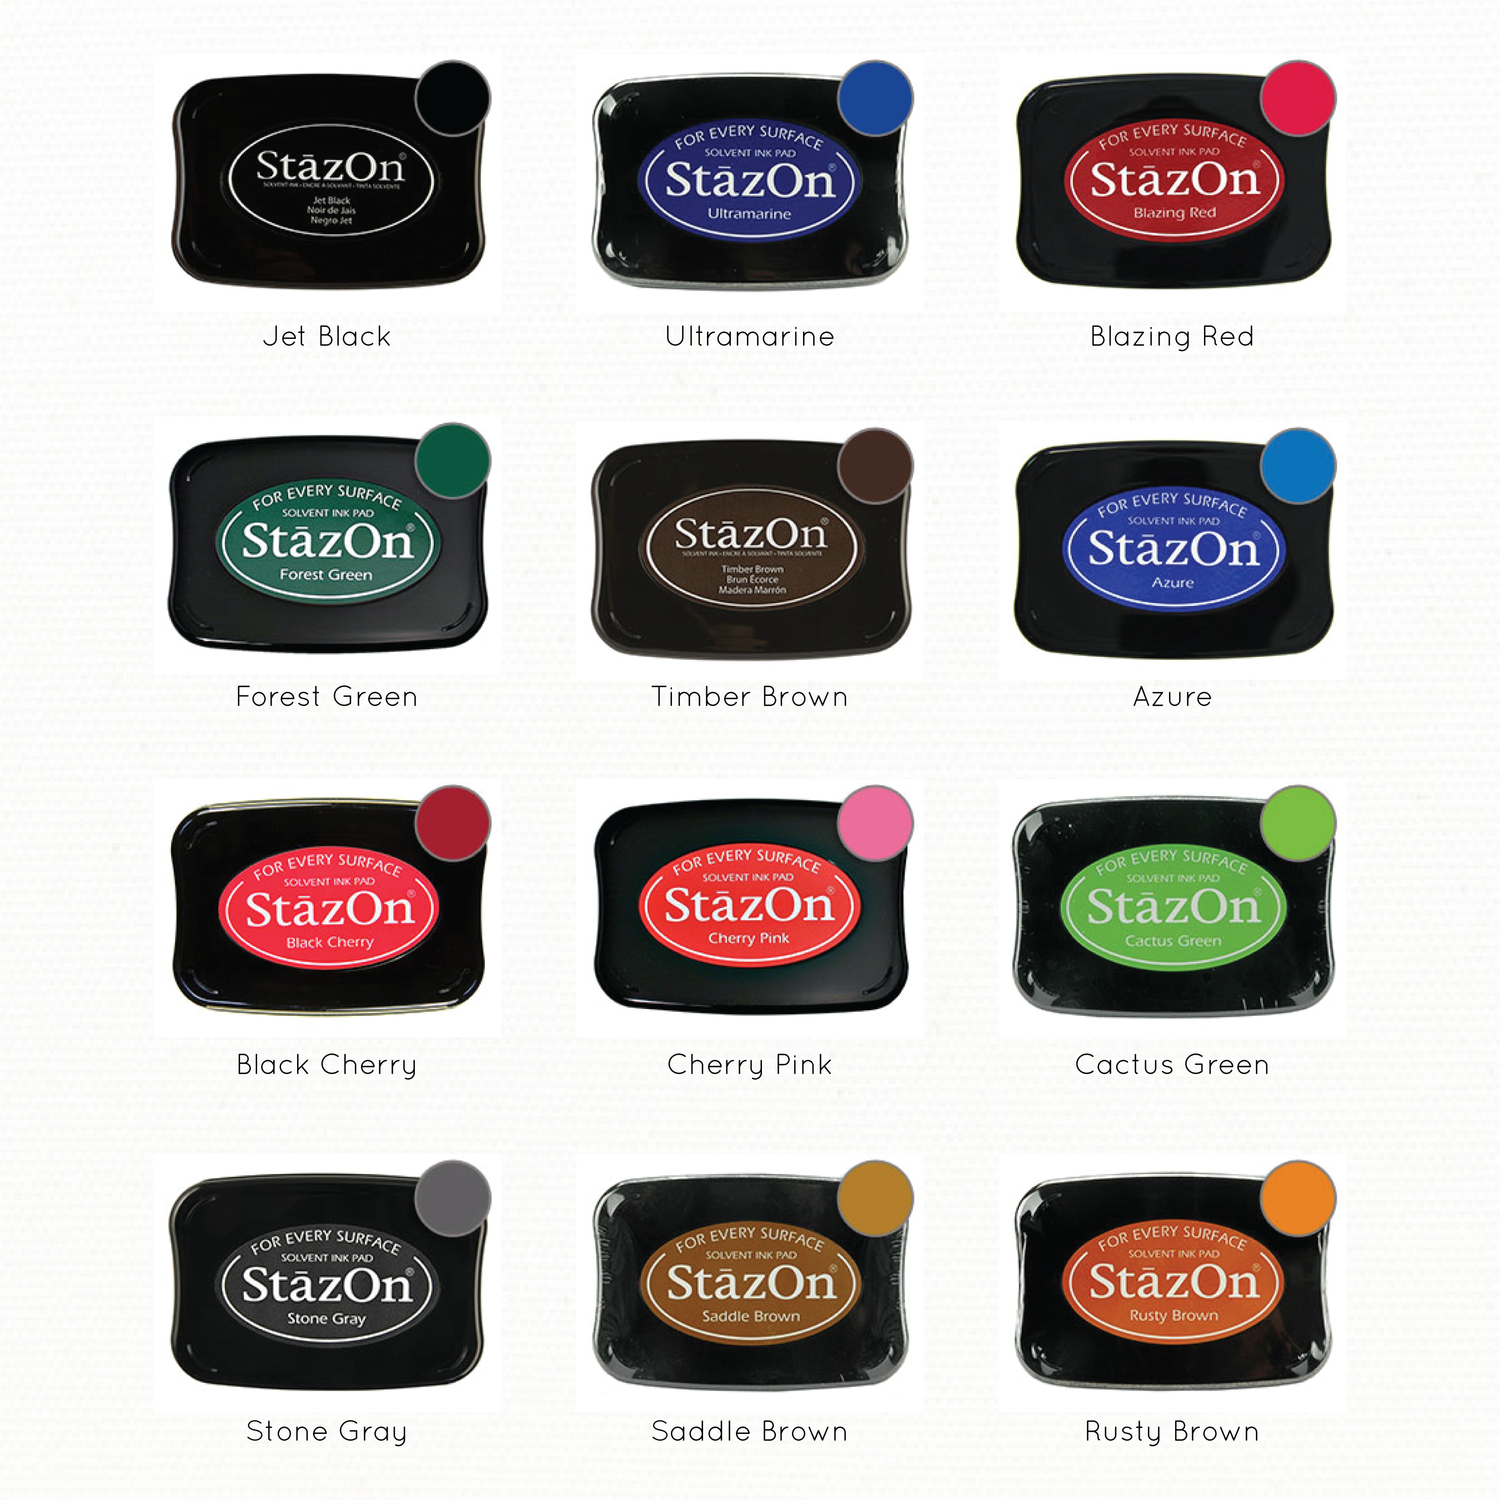 Stazon Ink Pad Archival, Ink Pads for Stamping, Ink Pads for